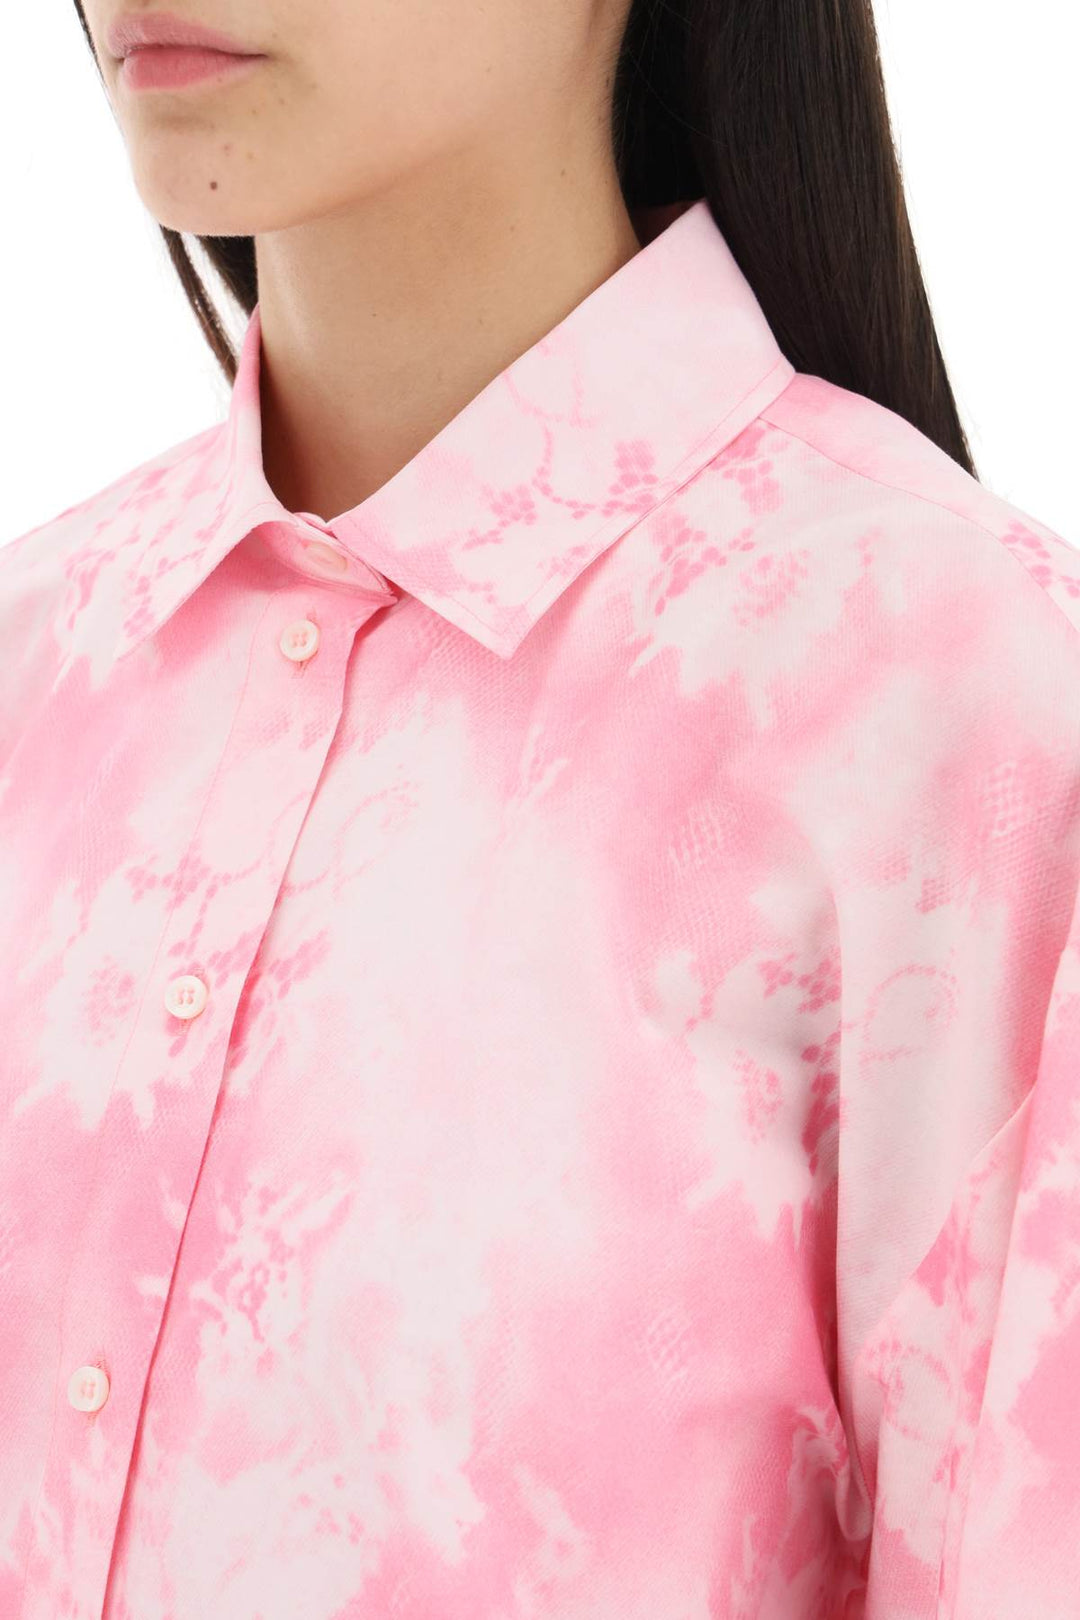 Msgm Oversized Shirt With All Over Print   Rosa